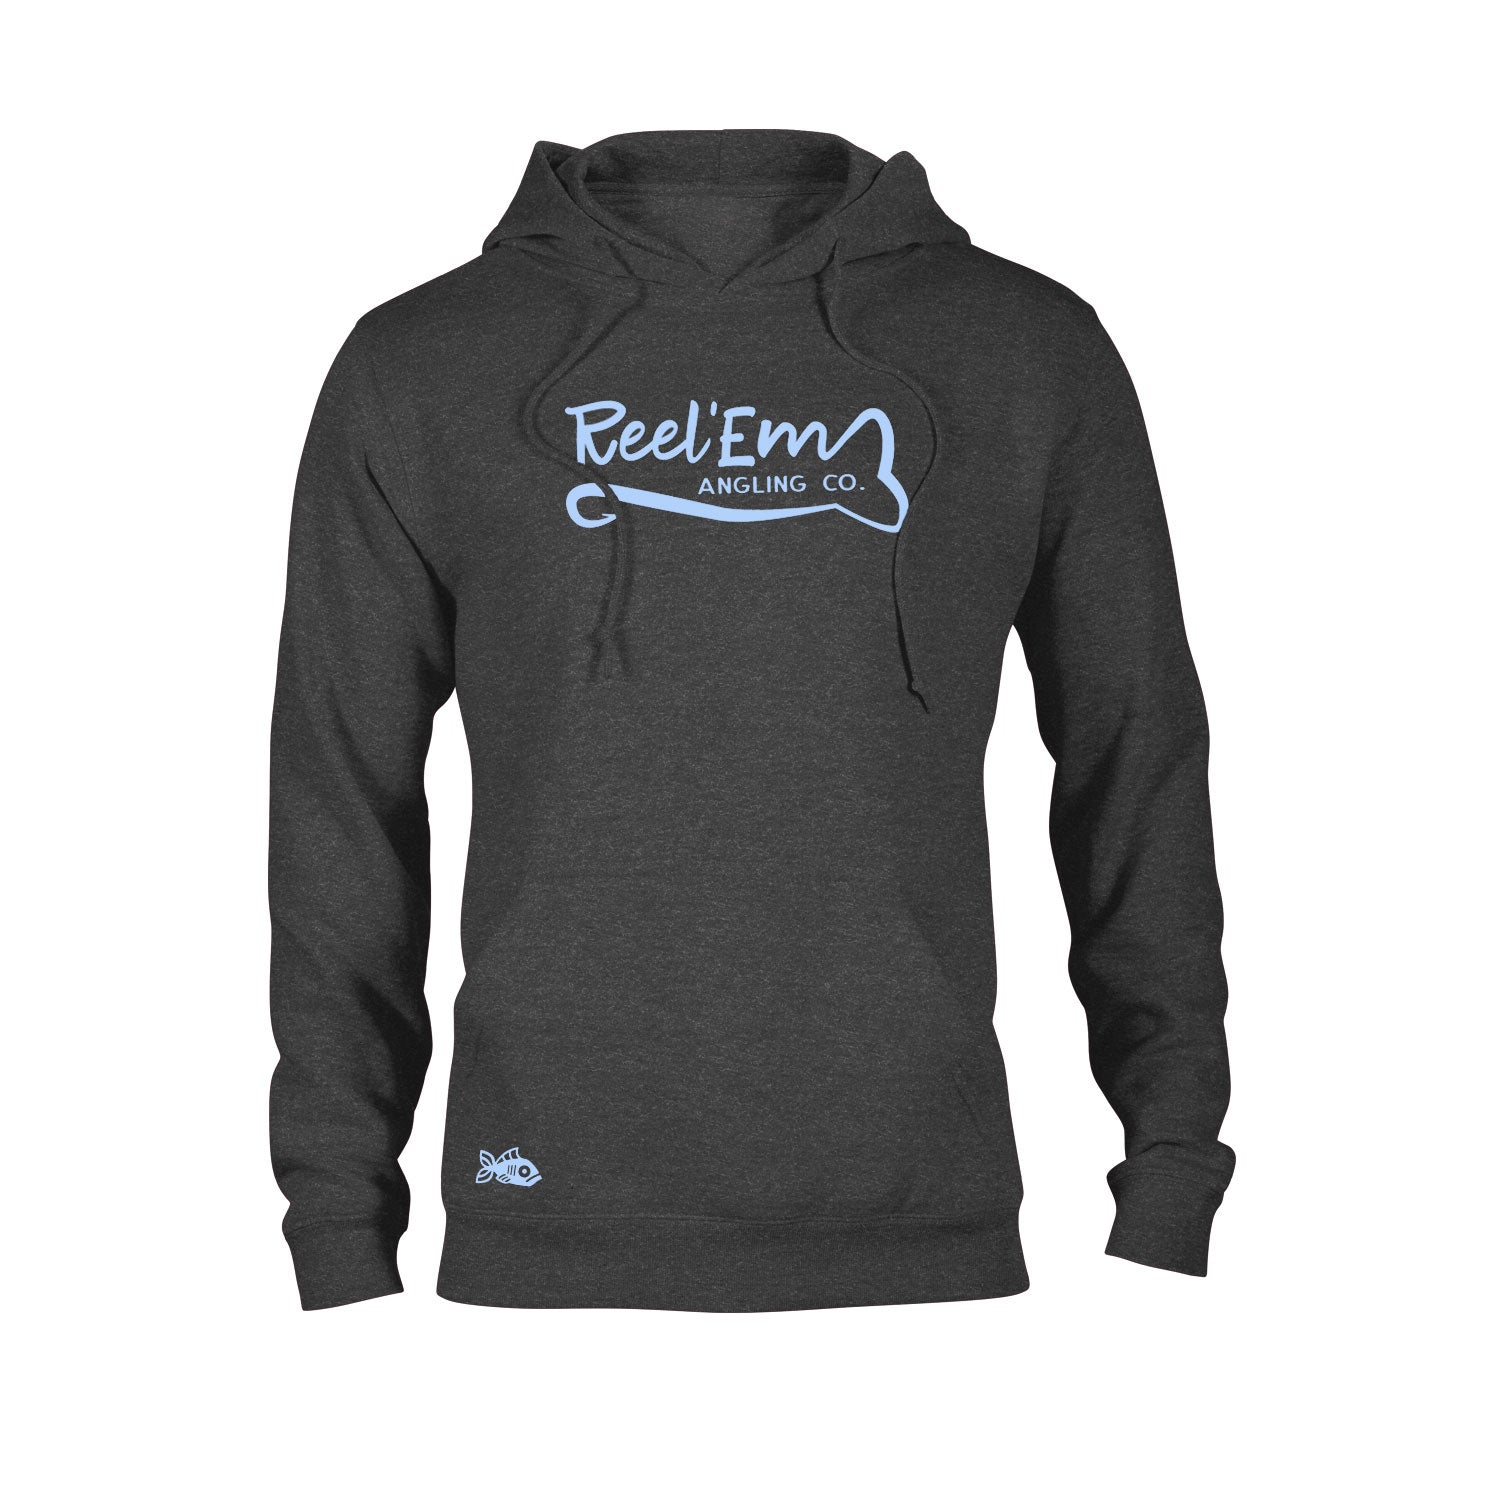 Light Weight Reel Classic Hoodie - Reel 'Em Angling Co.